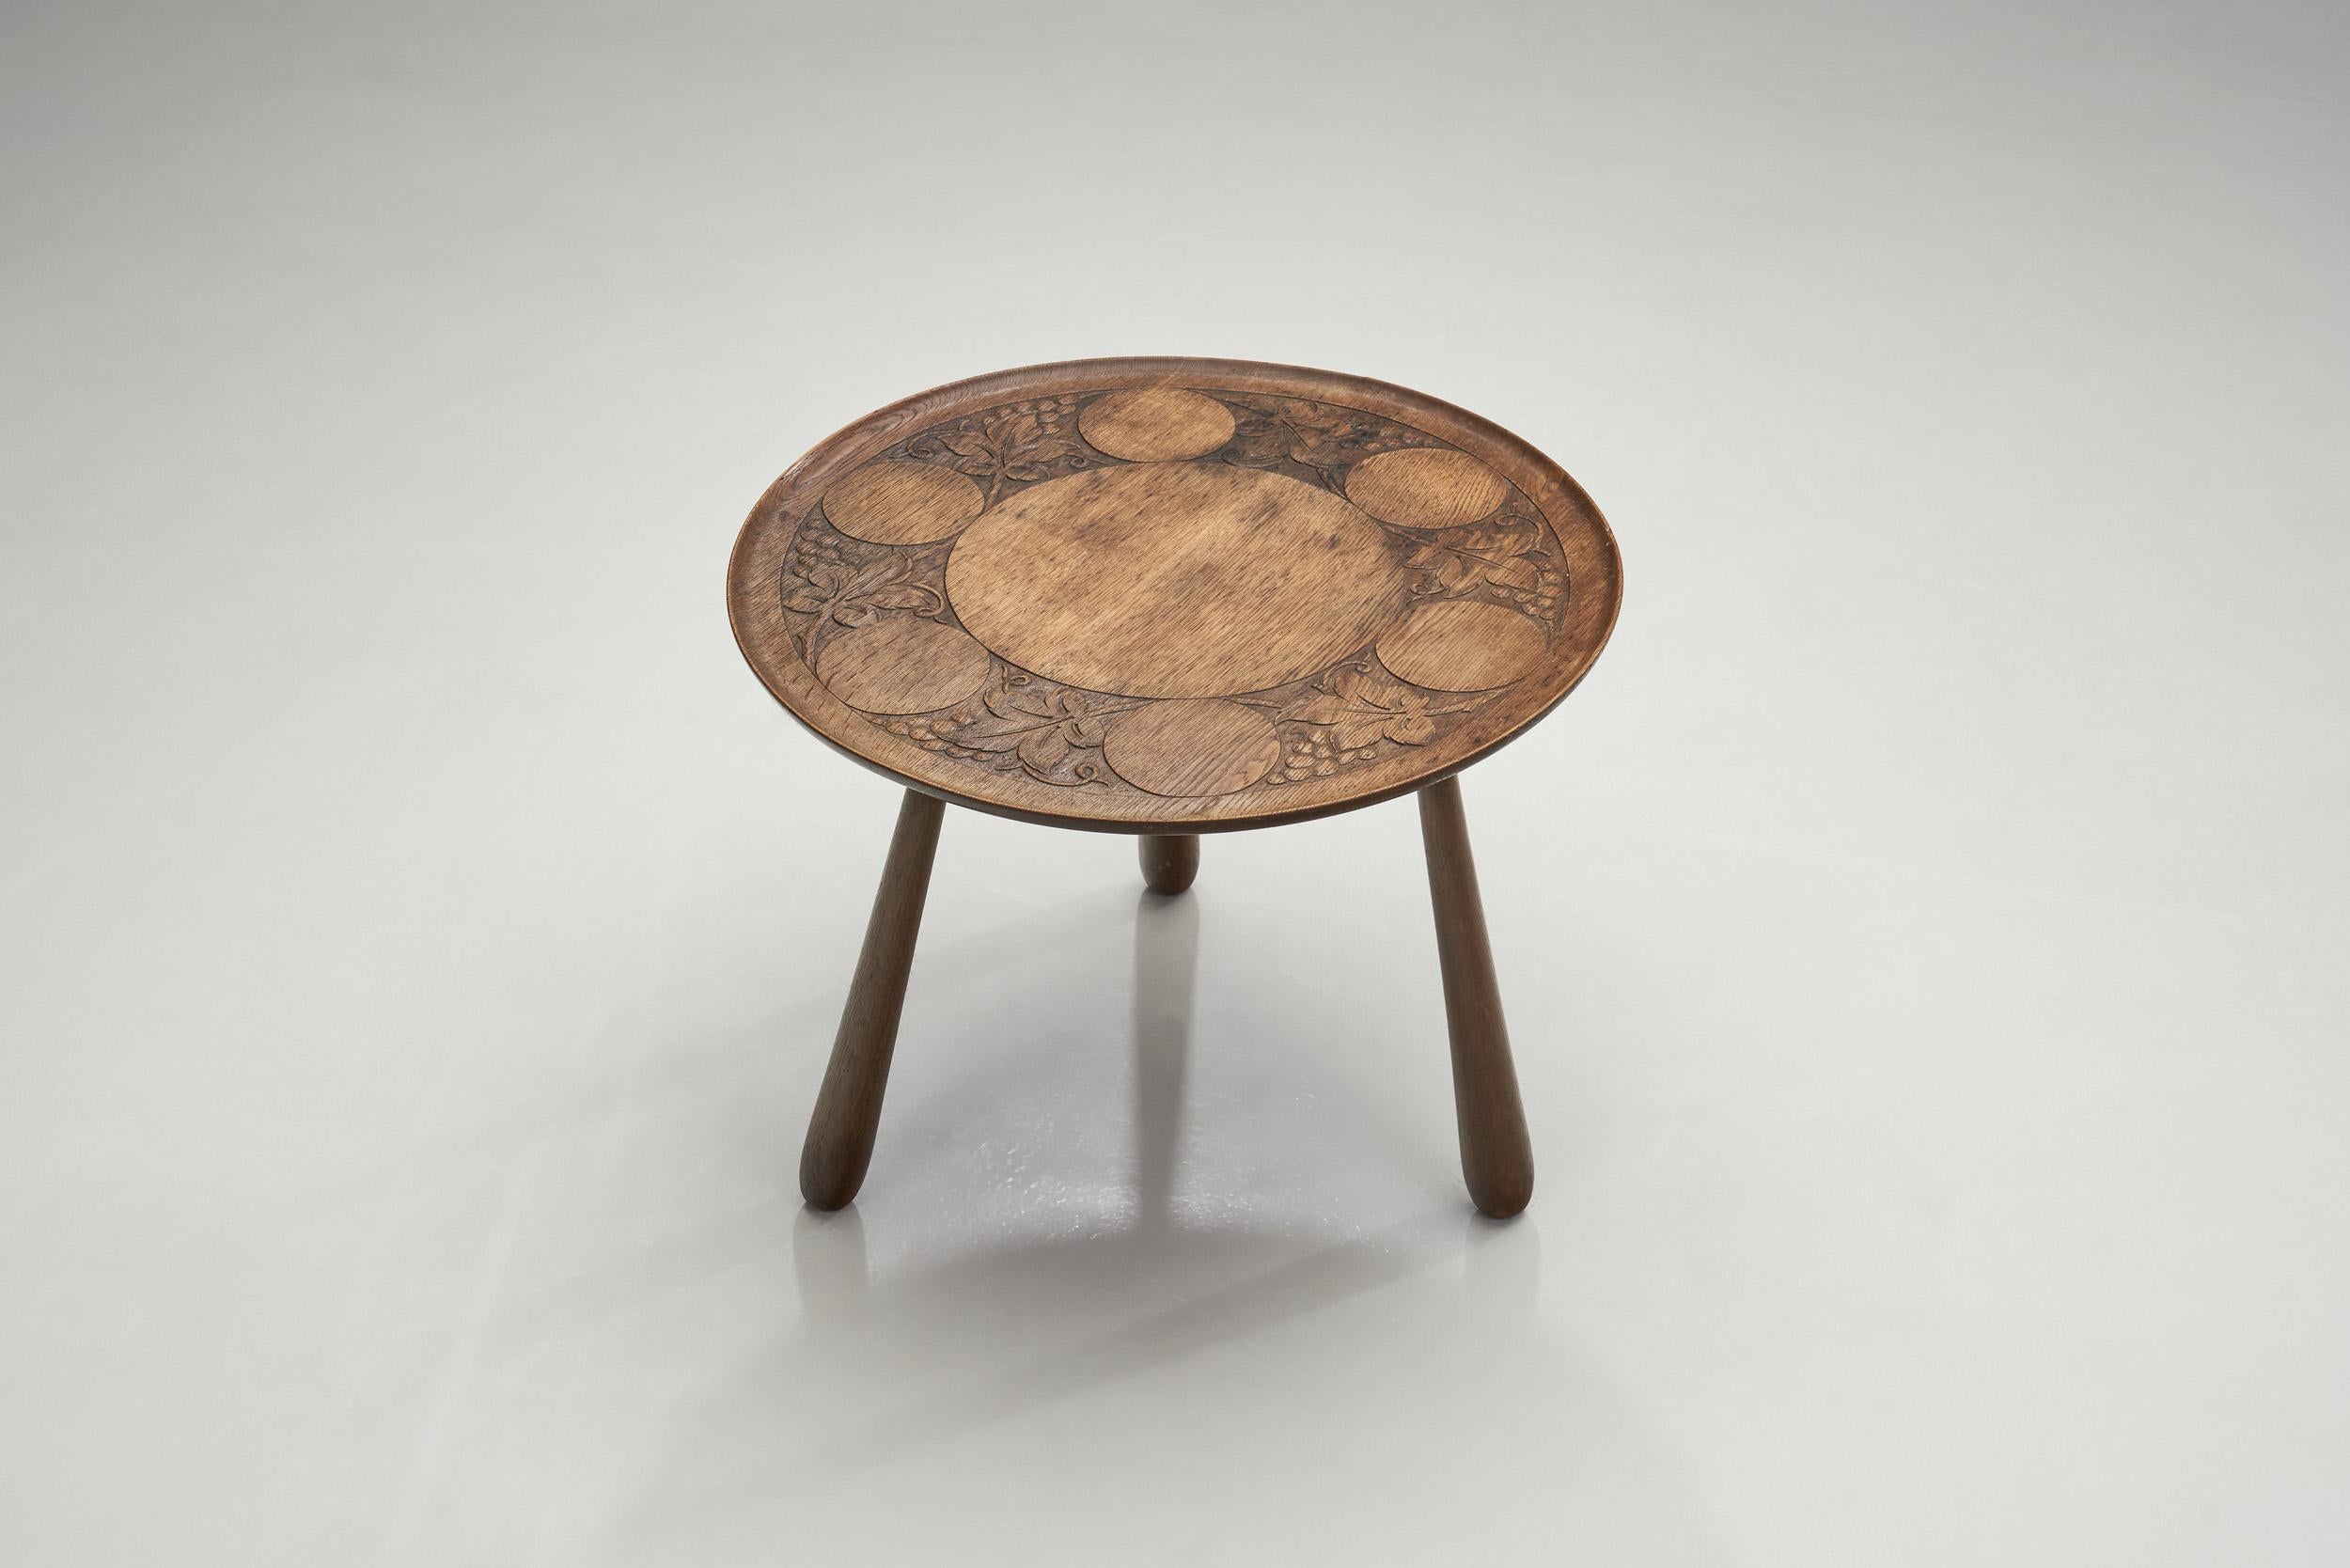 20th Century Carved Stained Oak Coffee Table on Tripod Legs, Europe, ca 1940s